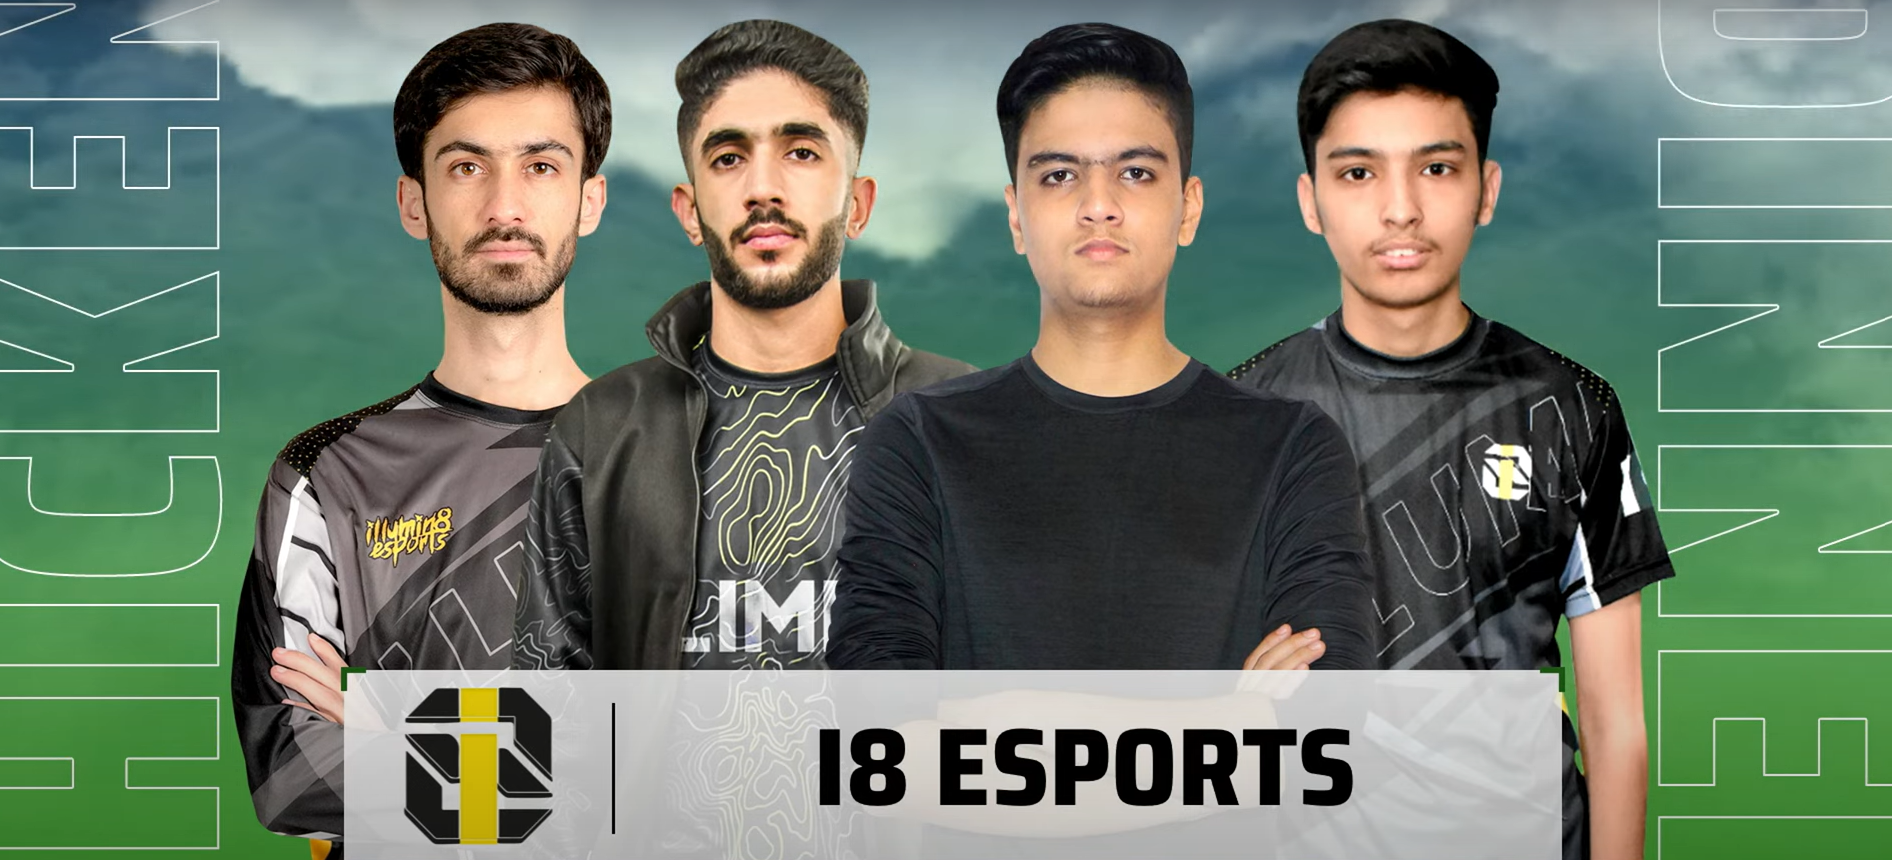 PMPL Pakistan 2022 Fall: I8 Esports leads the Week 1 overall standing of PUBG Mobile Pro League Pakistan 2022 Fall, Check Bonus Points standings and more